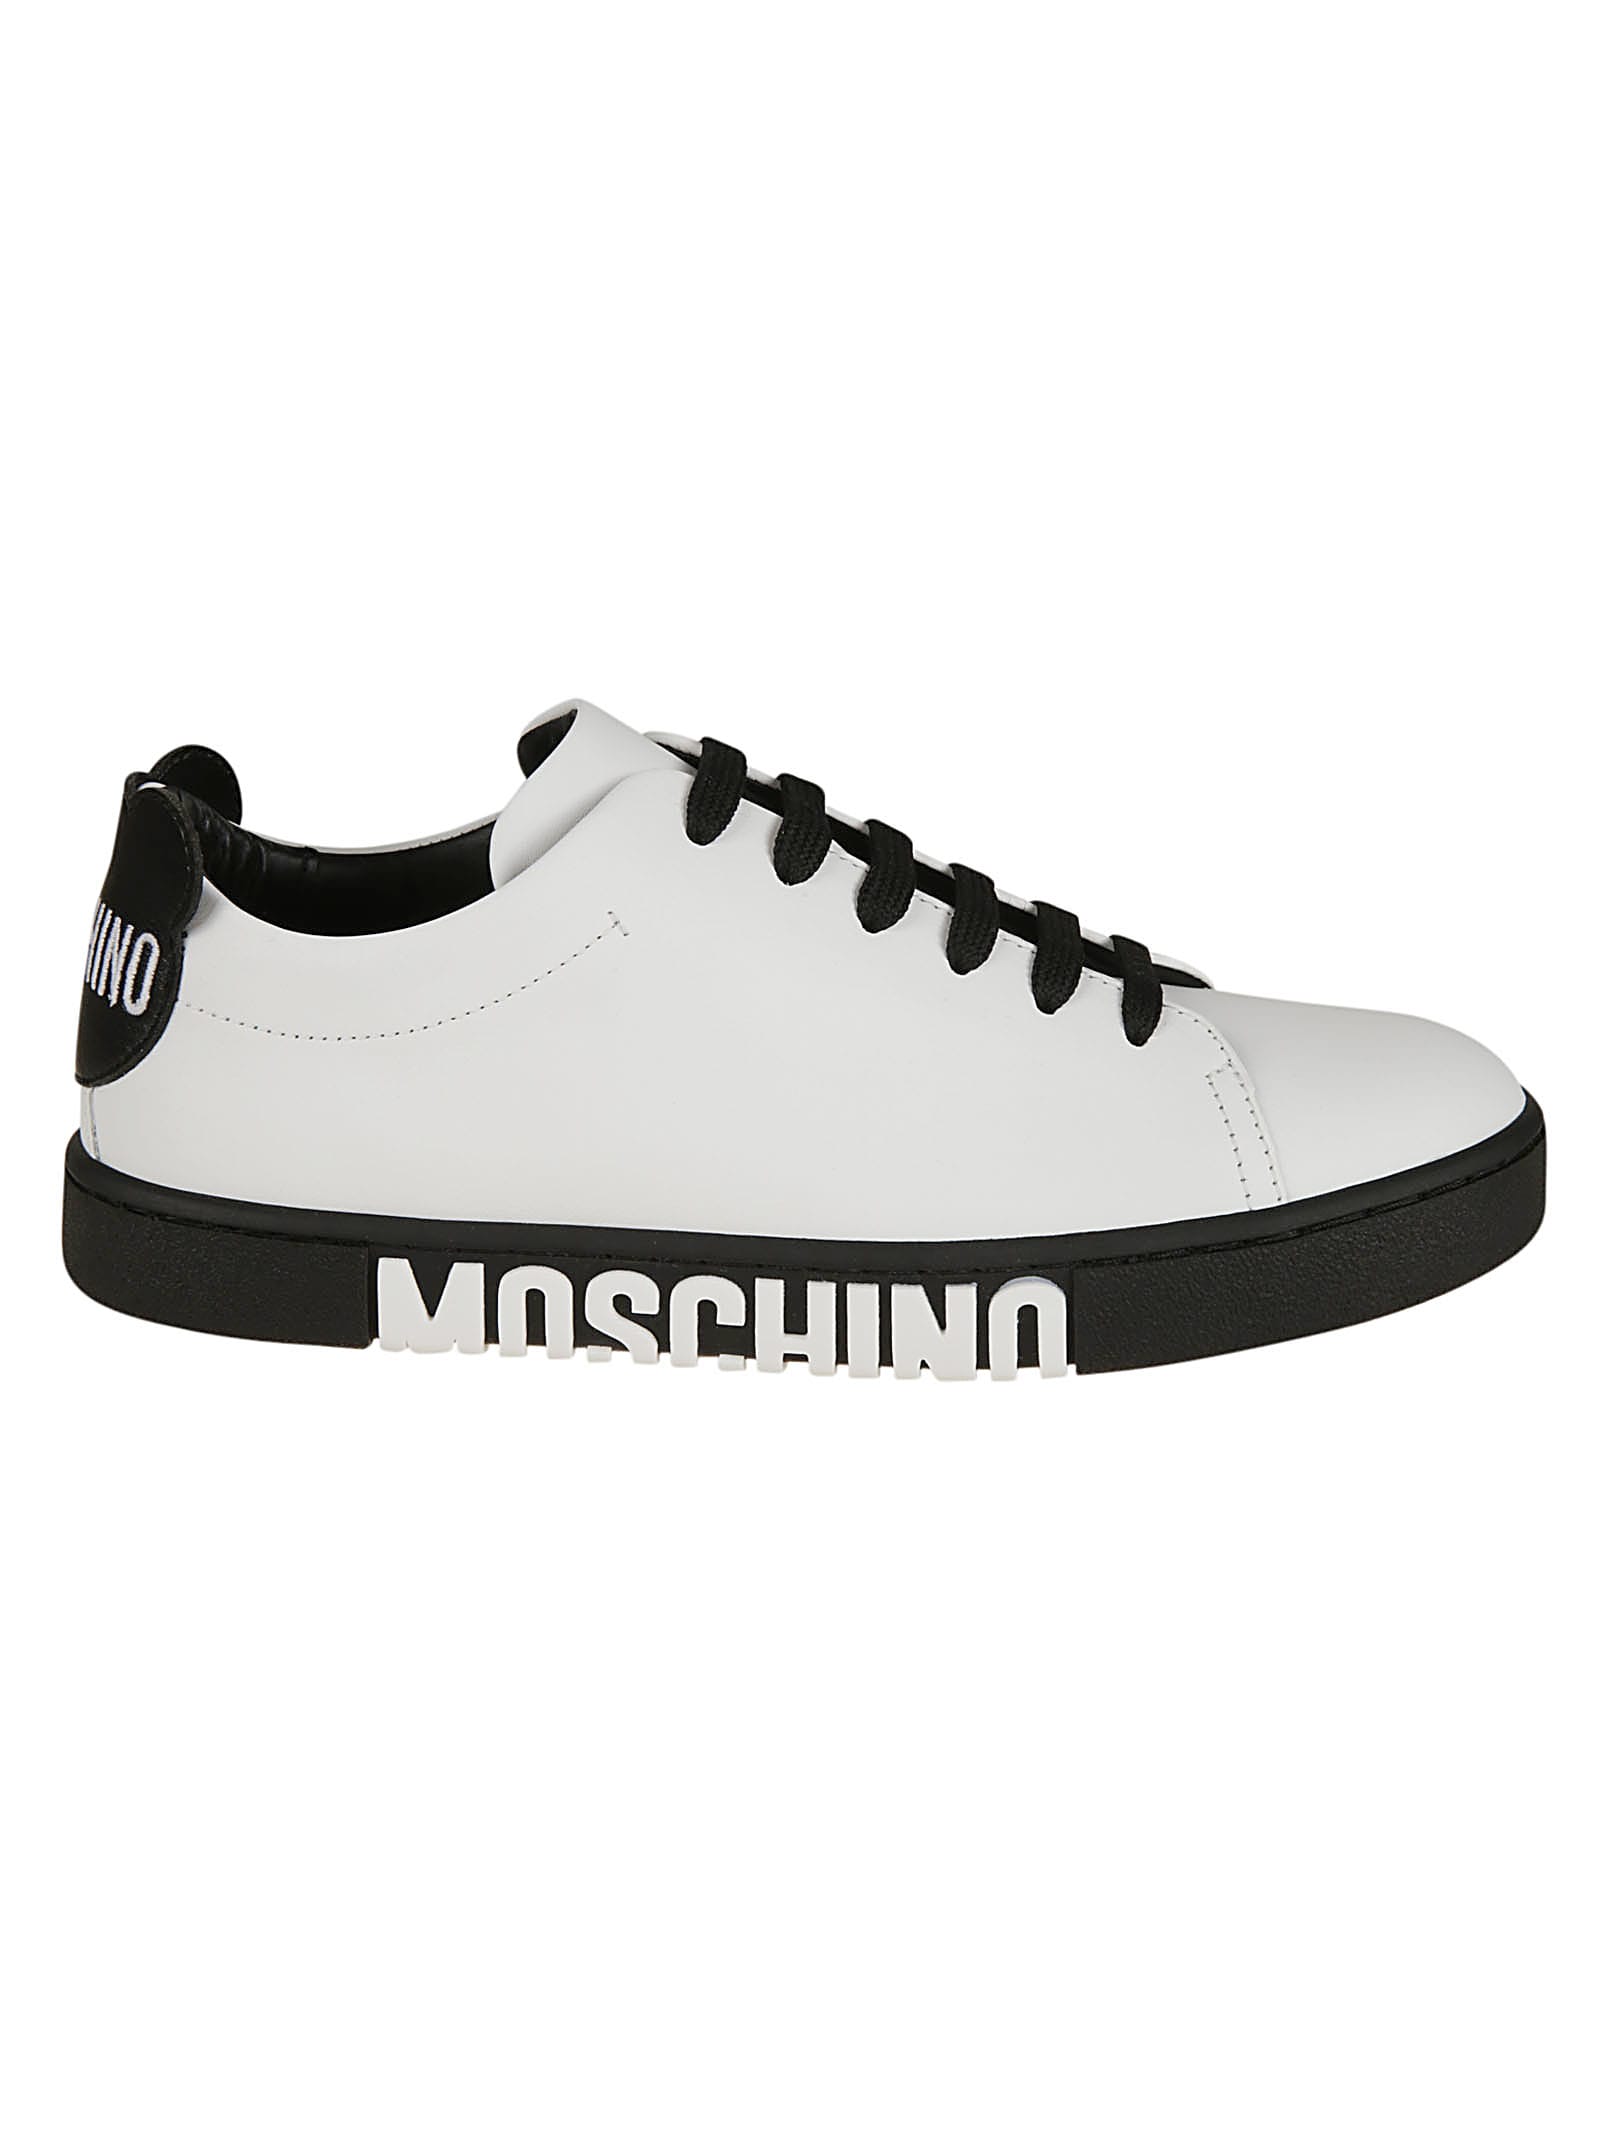 Moschino Embossed Logo Sole Sneakers